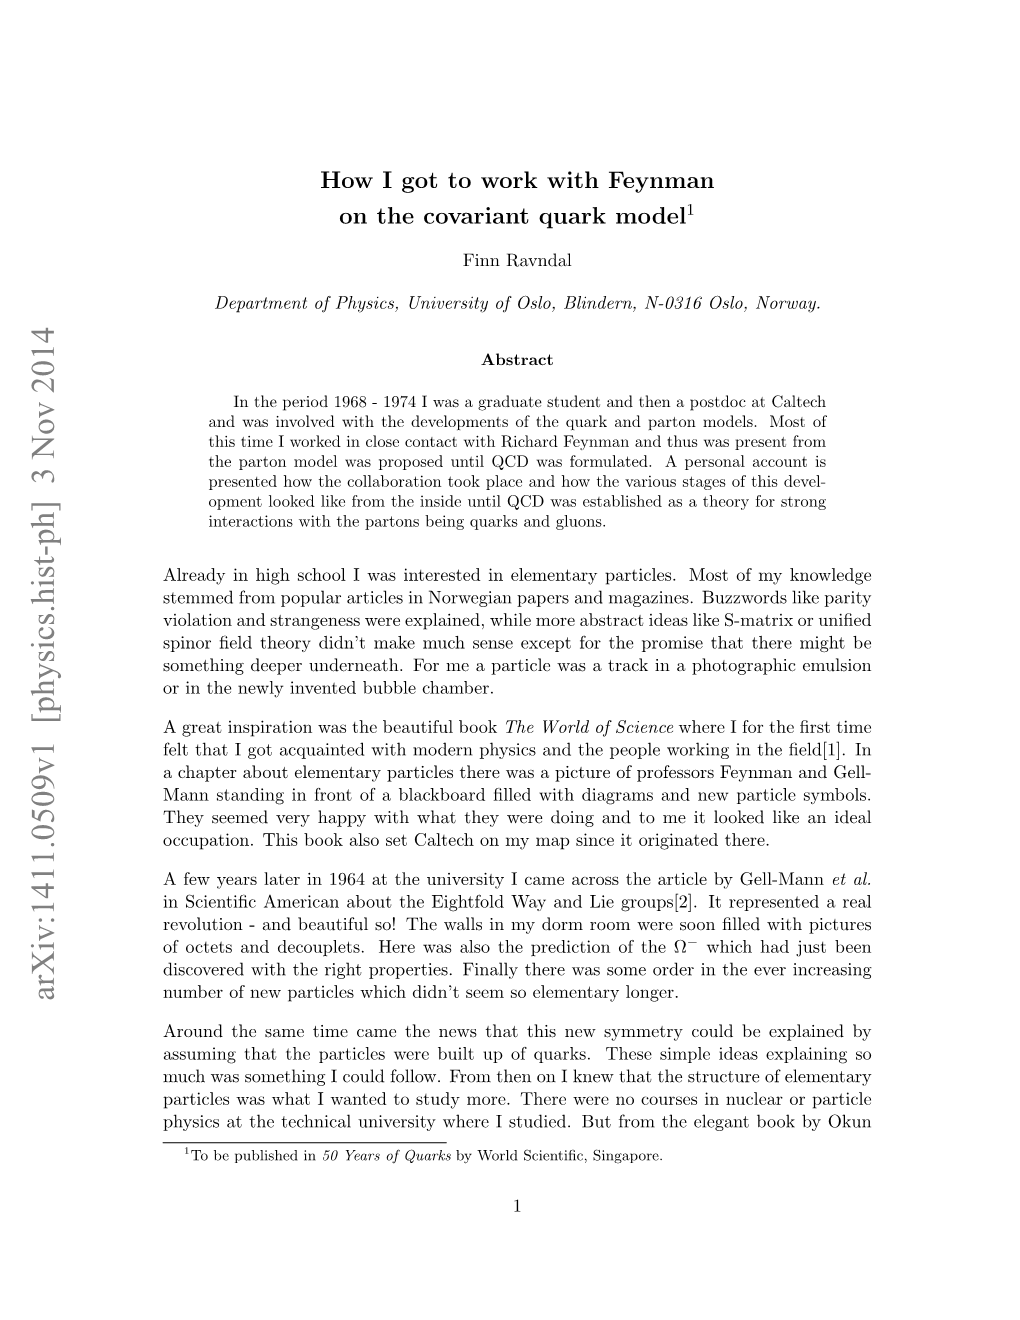 How I Got to Work with Feynman on the Covariant Quark Model1